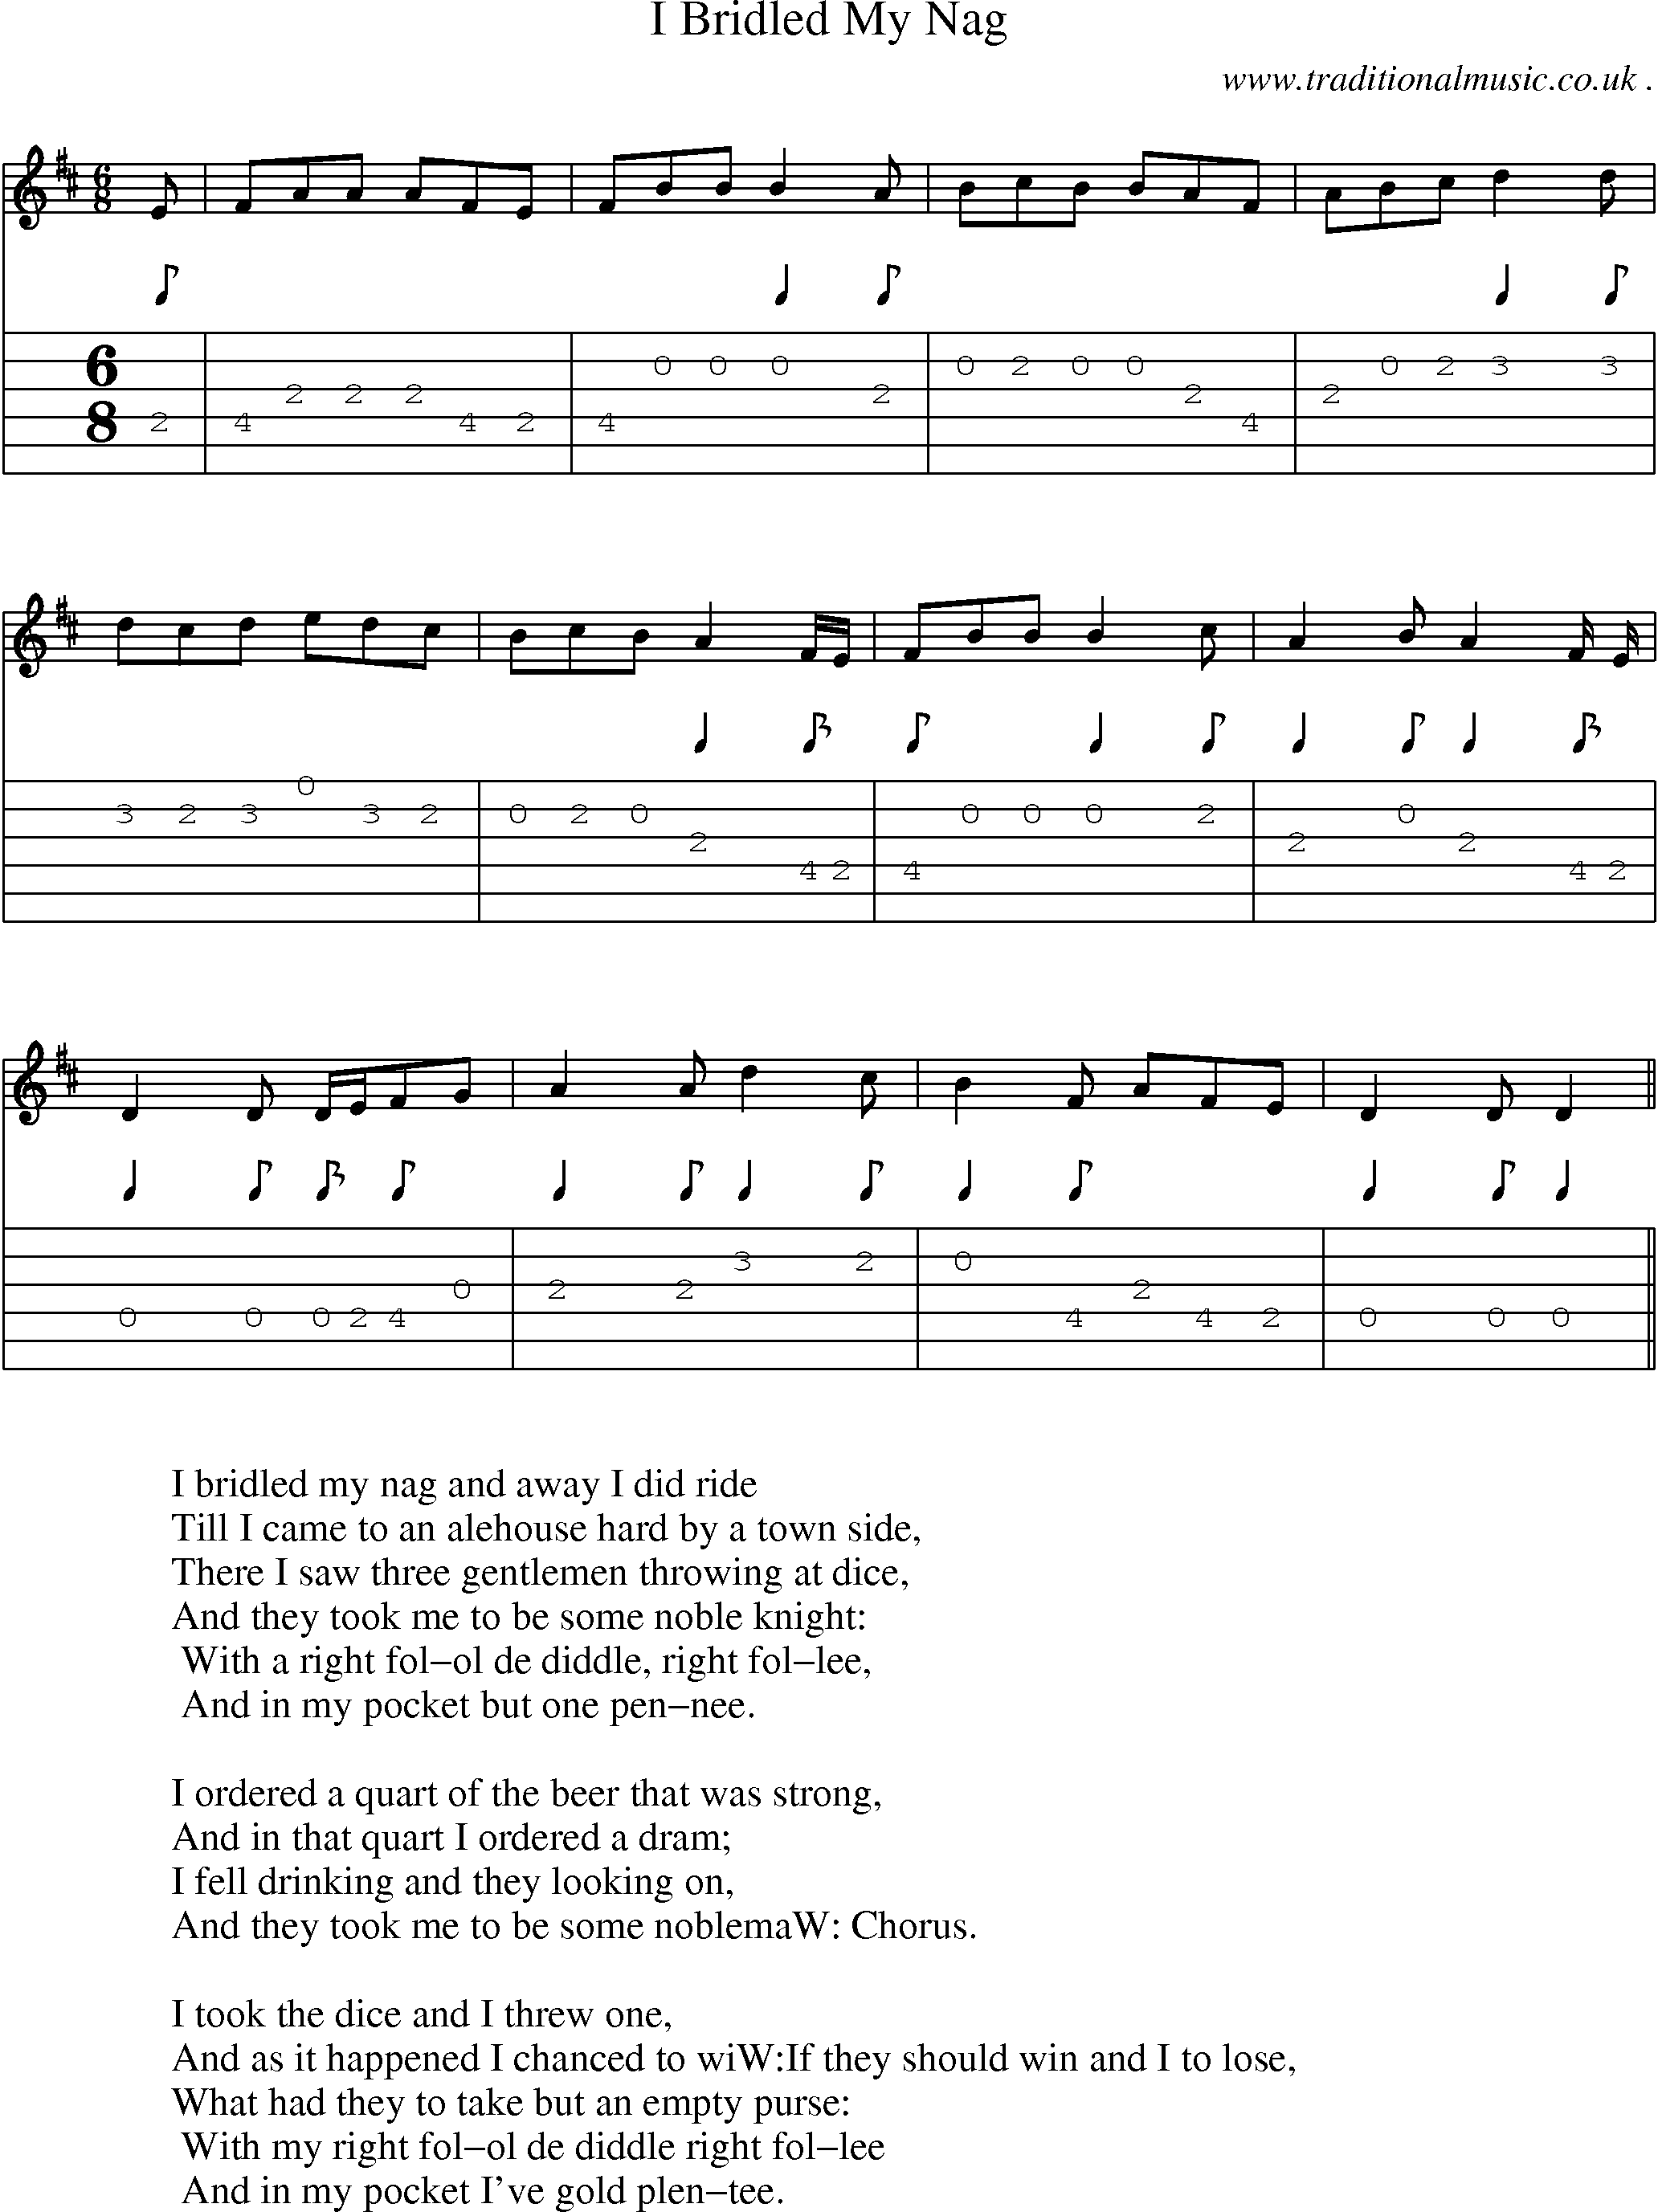 Sheet-Music and Guitar Tabs for I Bridled My Nag